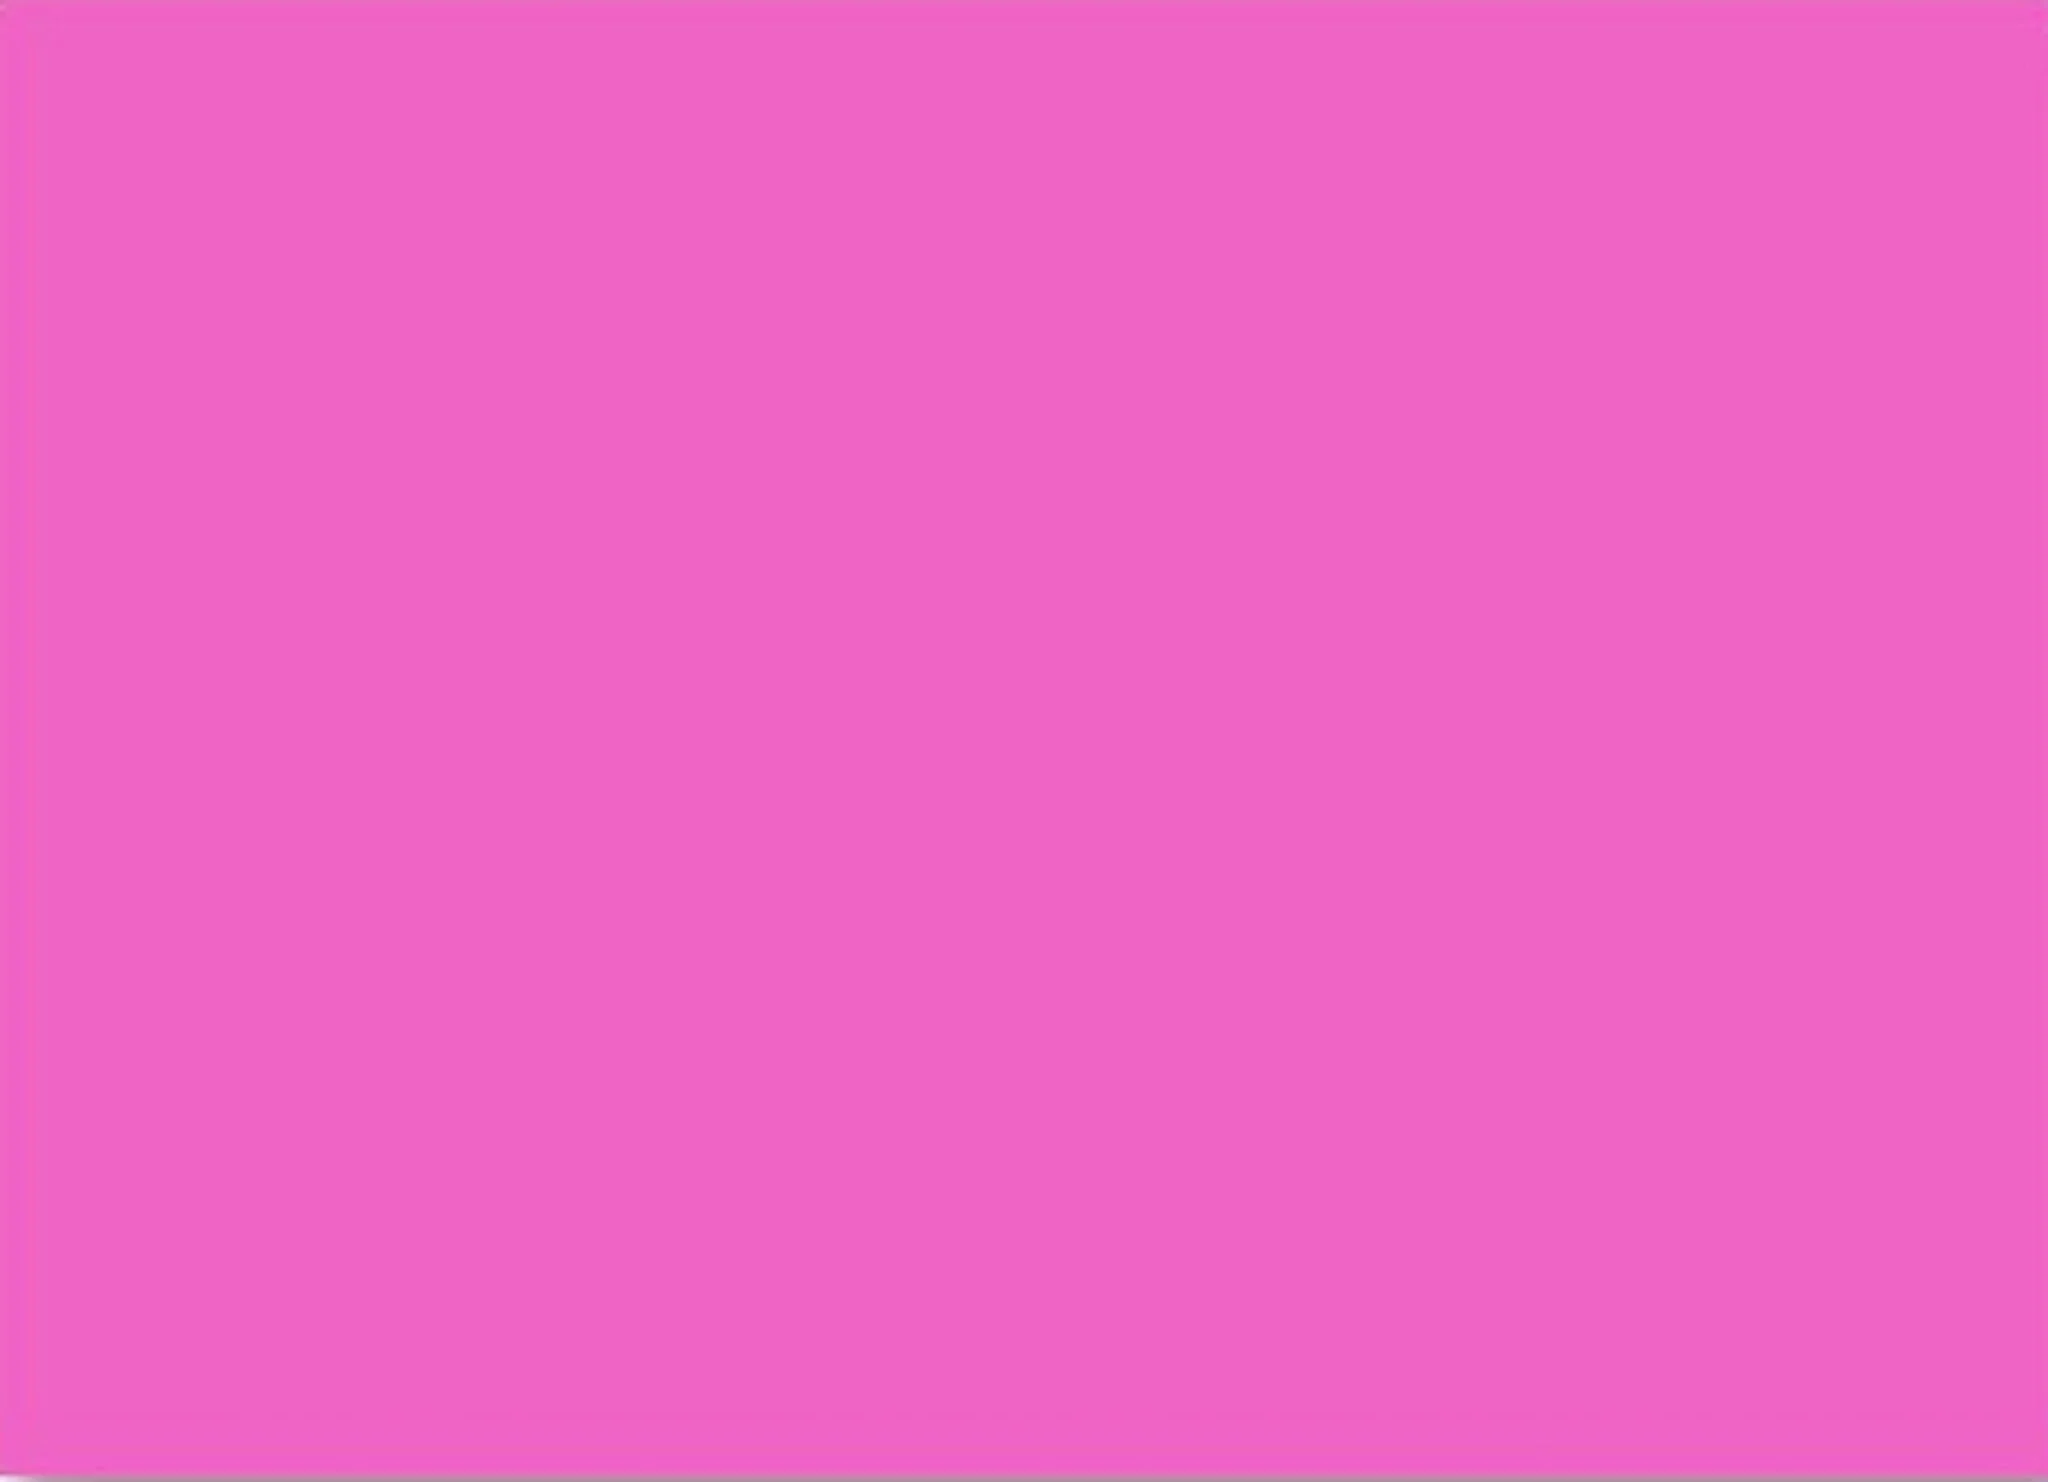 Plain Neon Pink Backgrounds For – plain neon pink